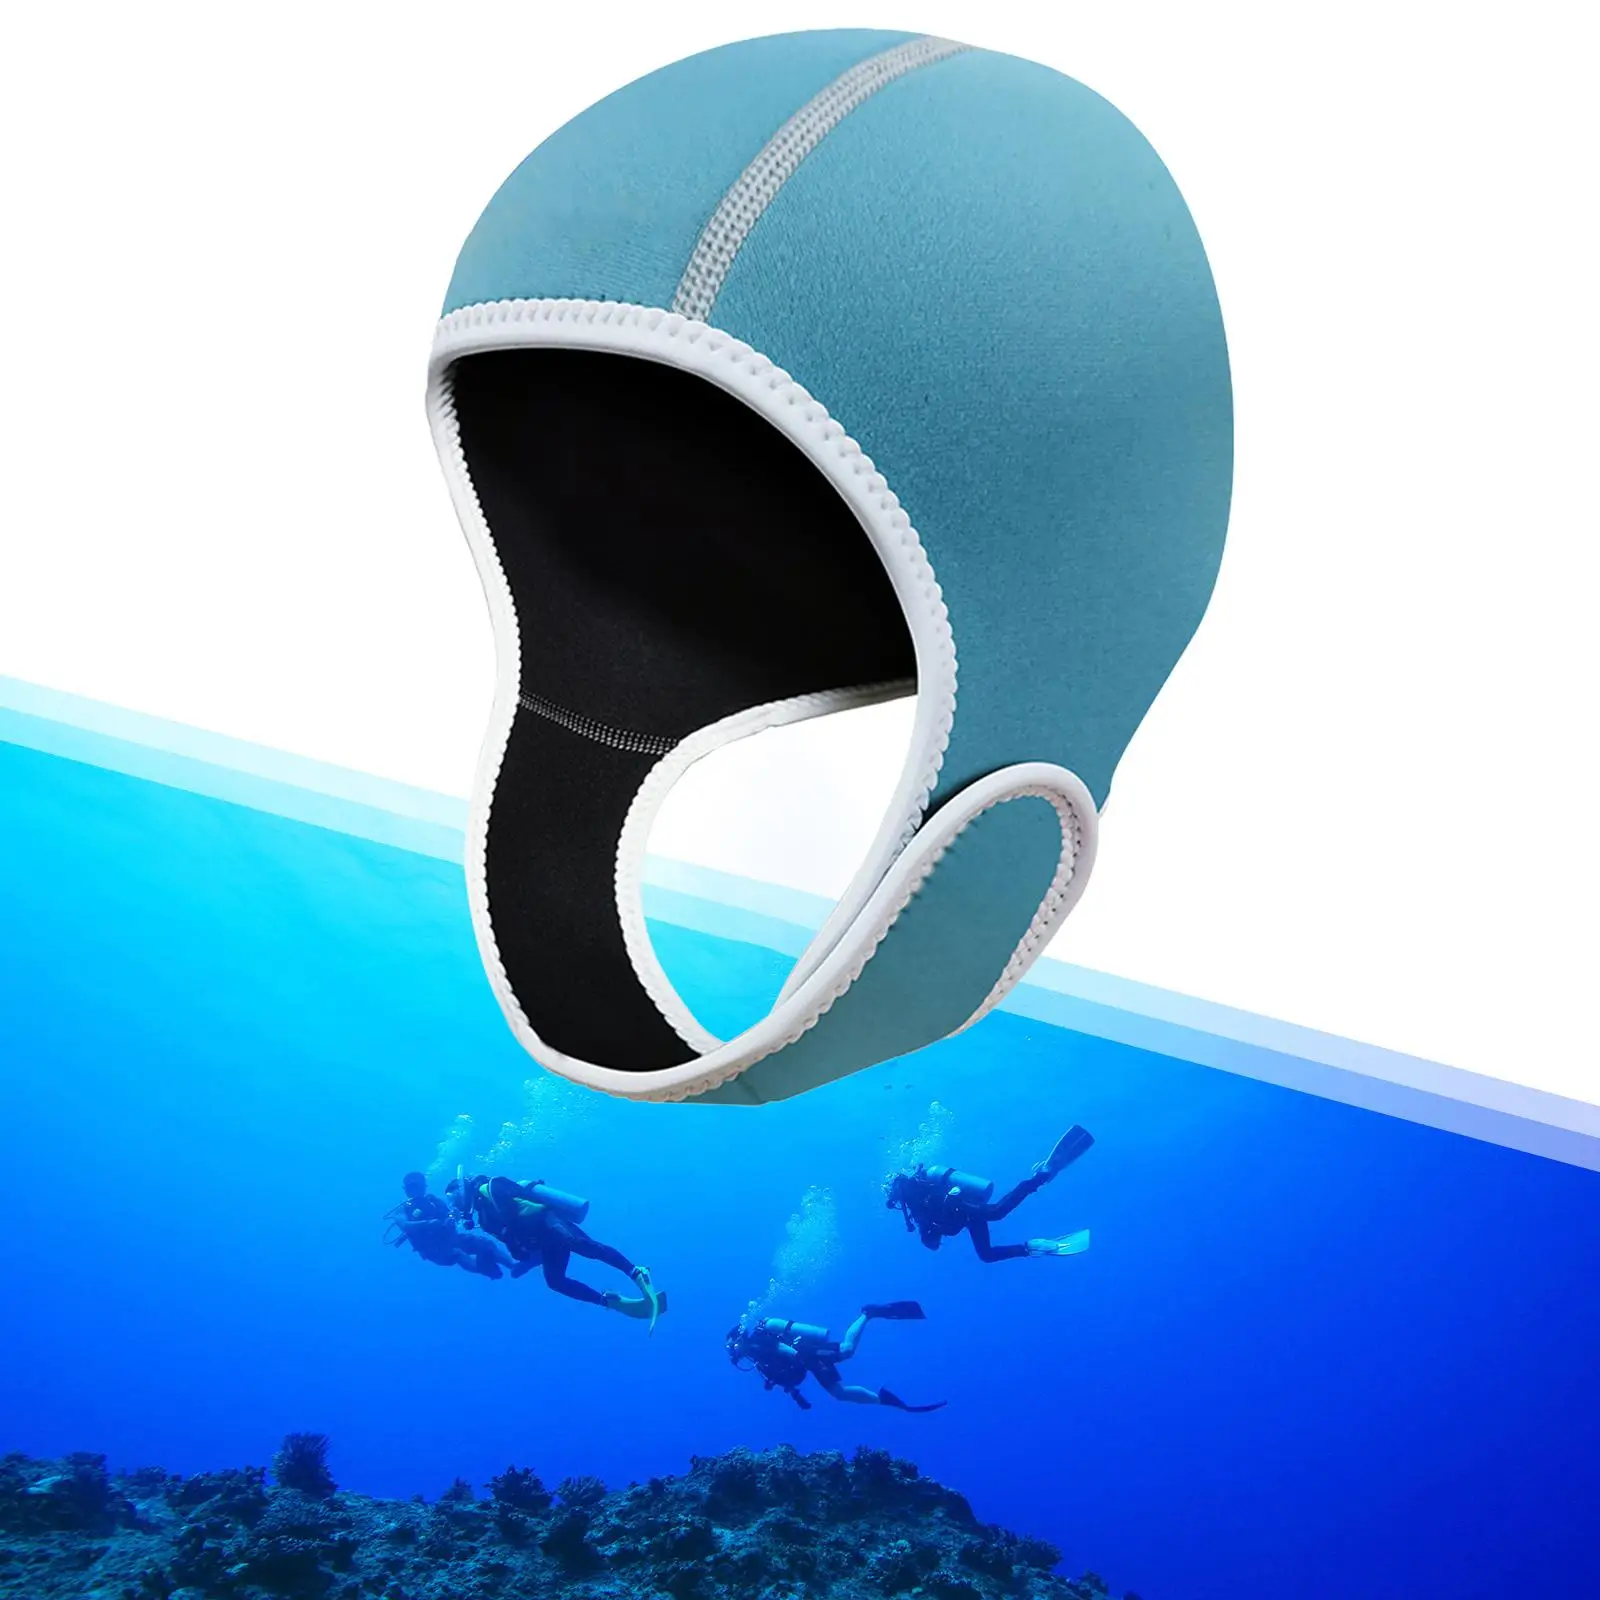 Diving Hood with Chin Strap Ear Protective 2mm Neoprene Wetsuit Hood Swimming Hat Surfing Hat for Women Men Winter Sailing Canoe